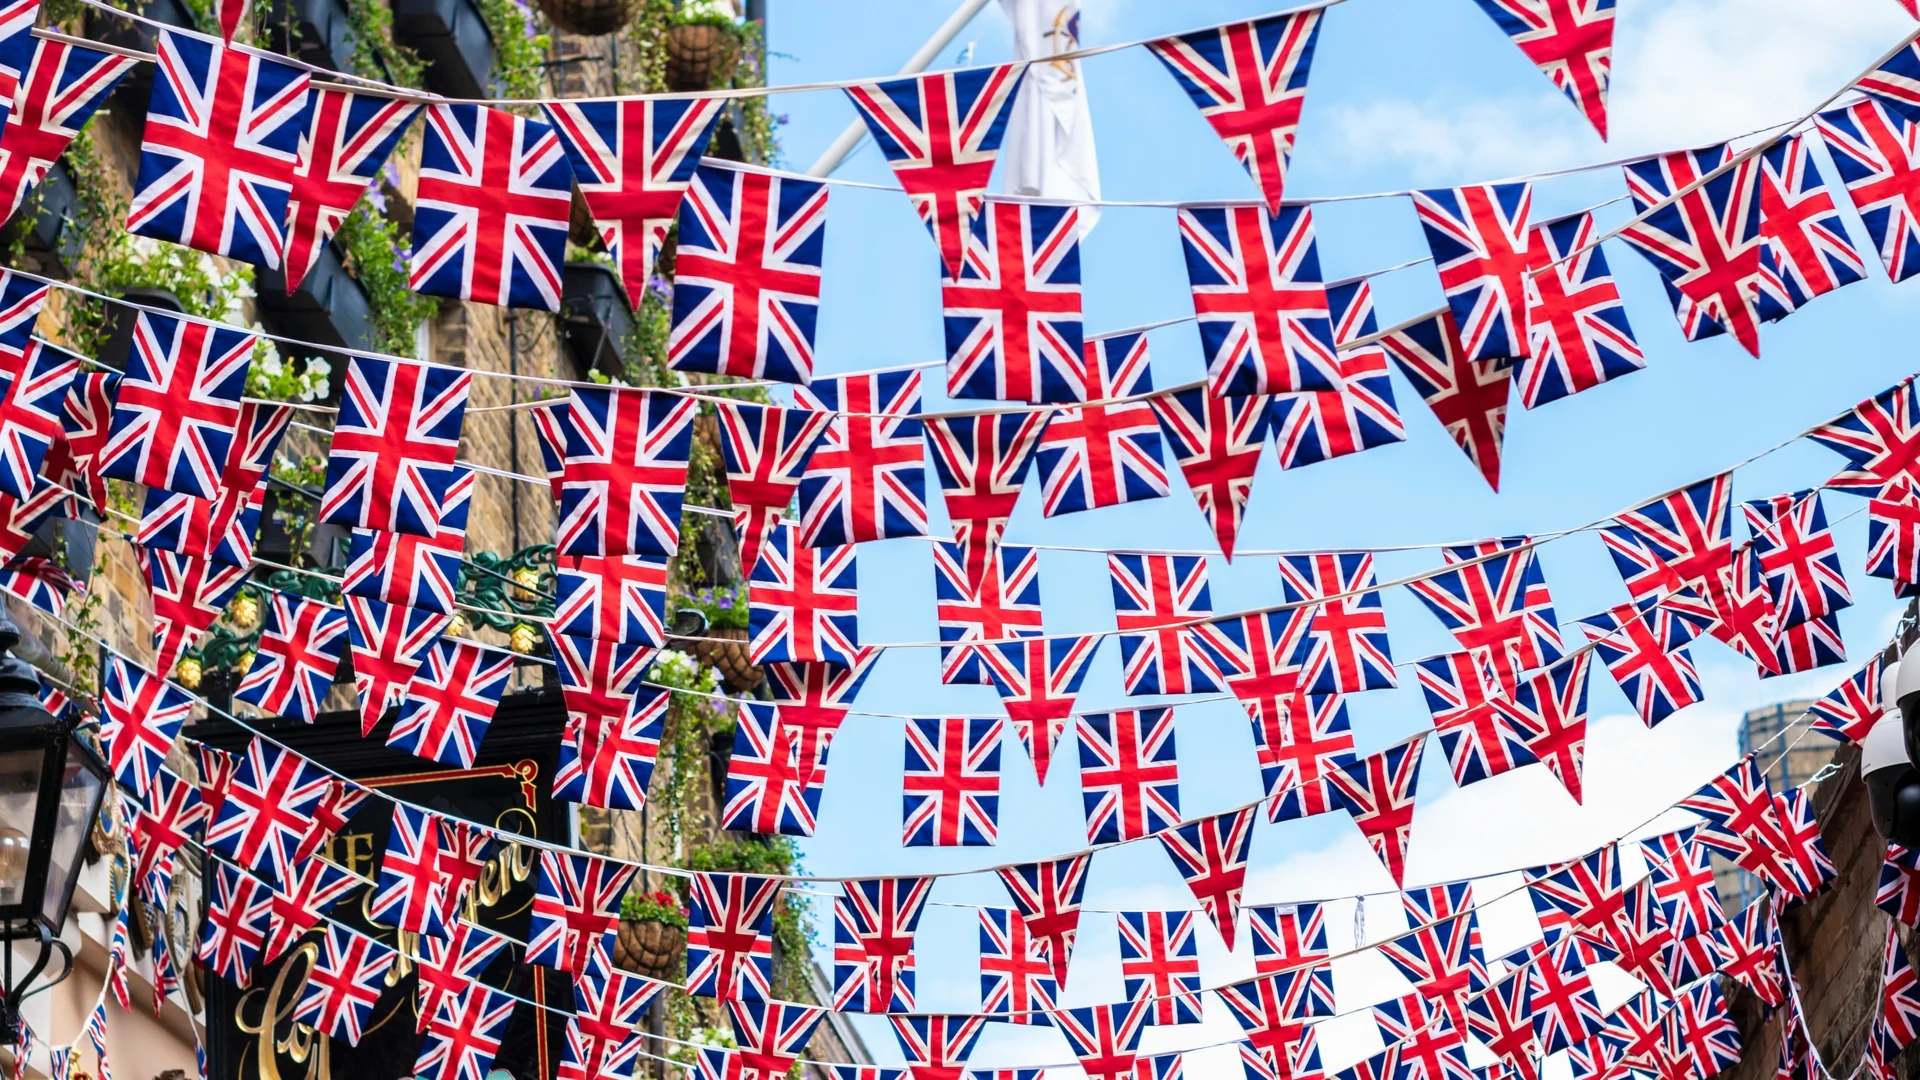 Union,jack,flags,hanging,at,the,street,ready,to,national